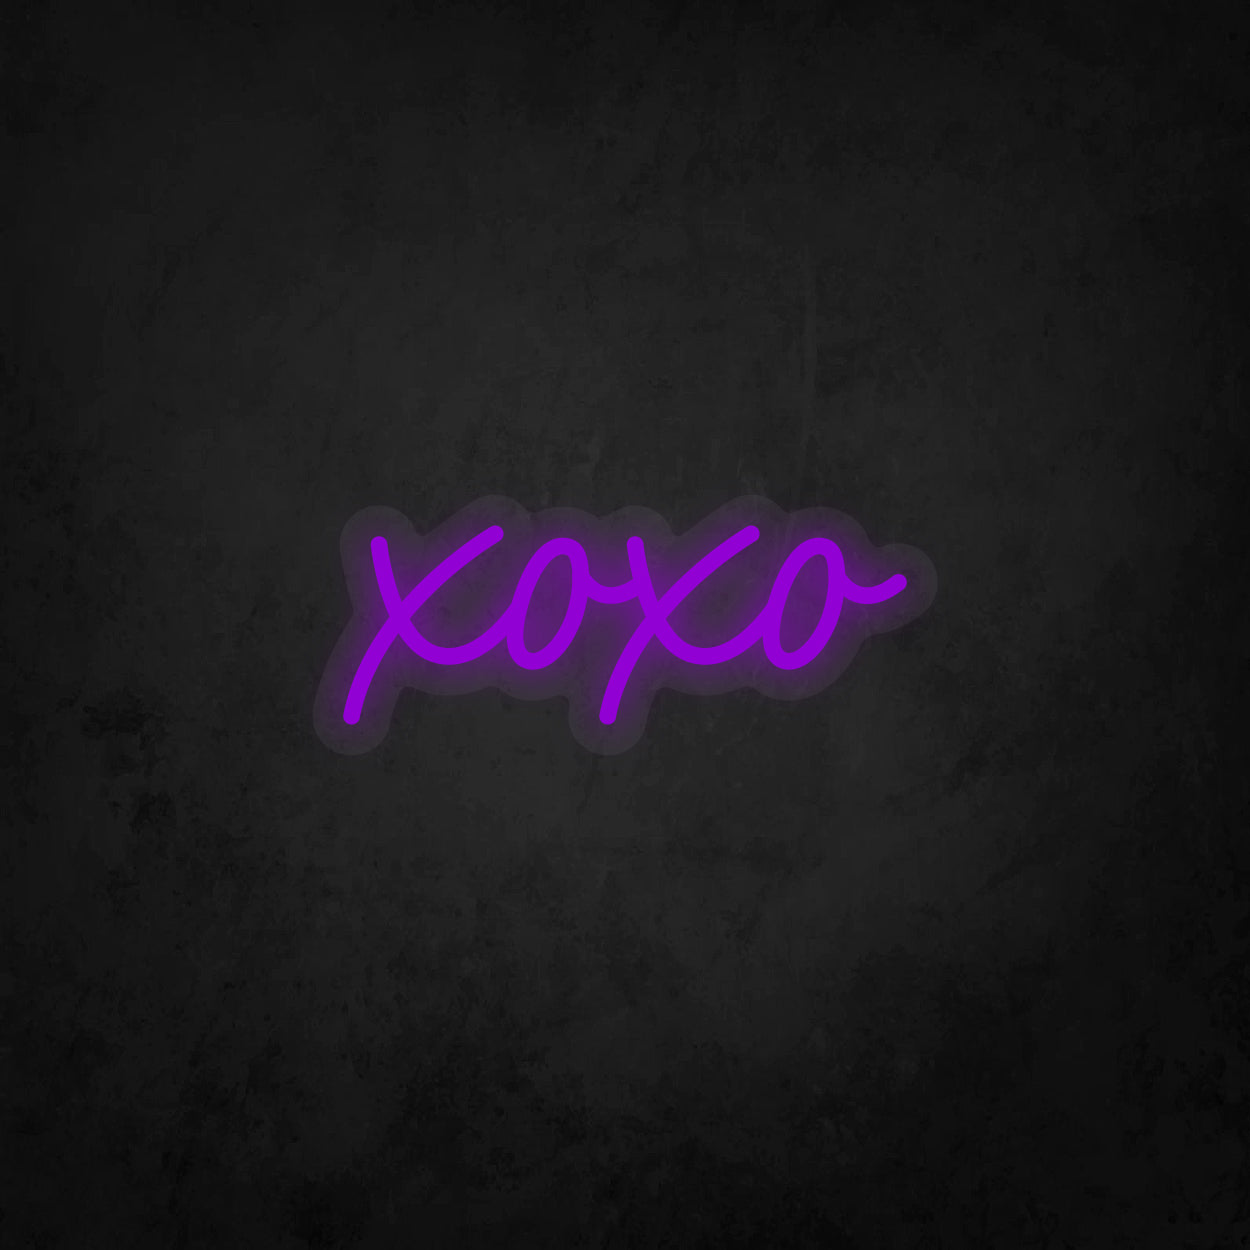 LED Neon Sign - xoxo - Hugs and Kisses - Lowercase